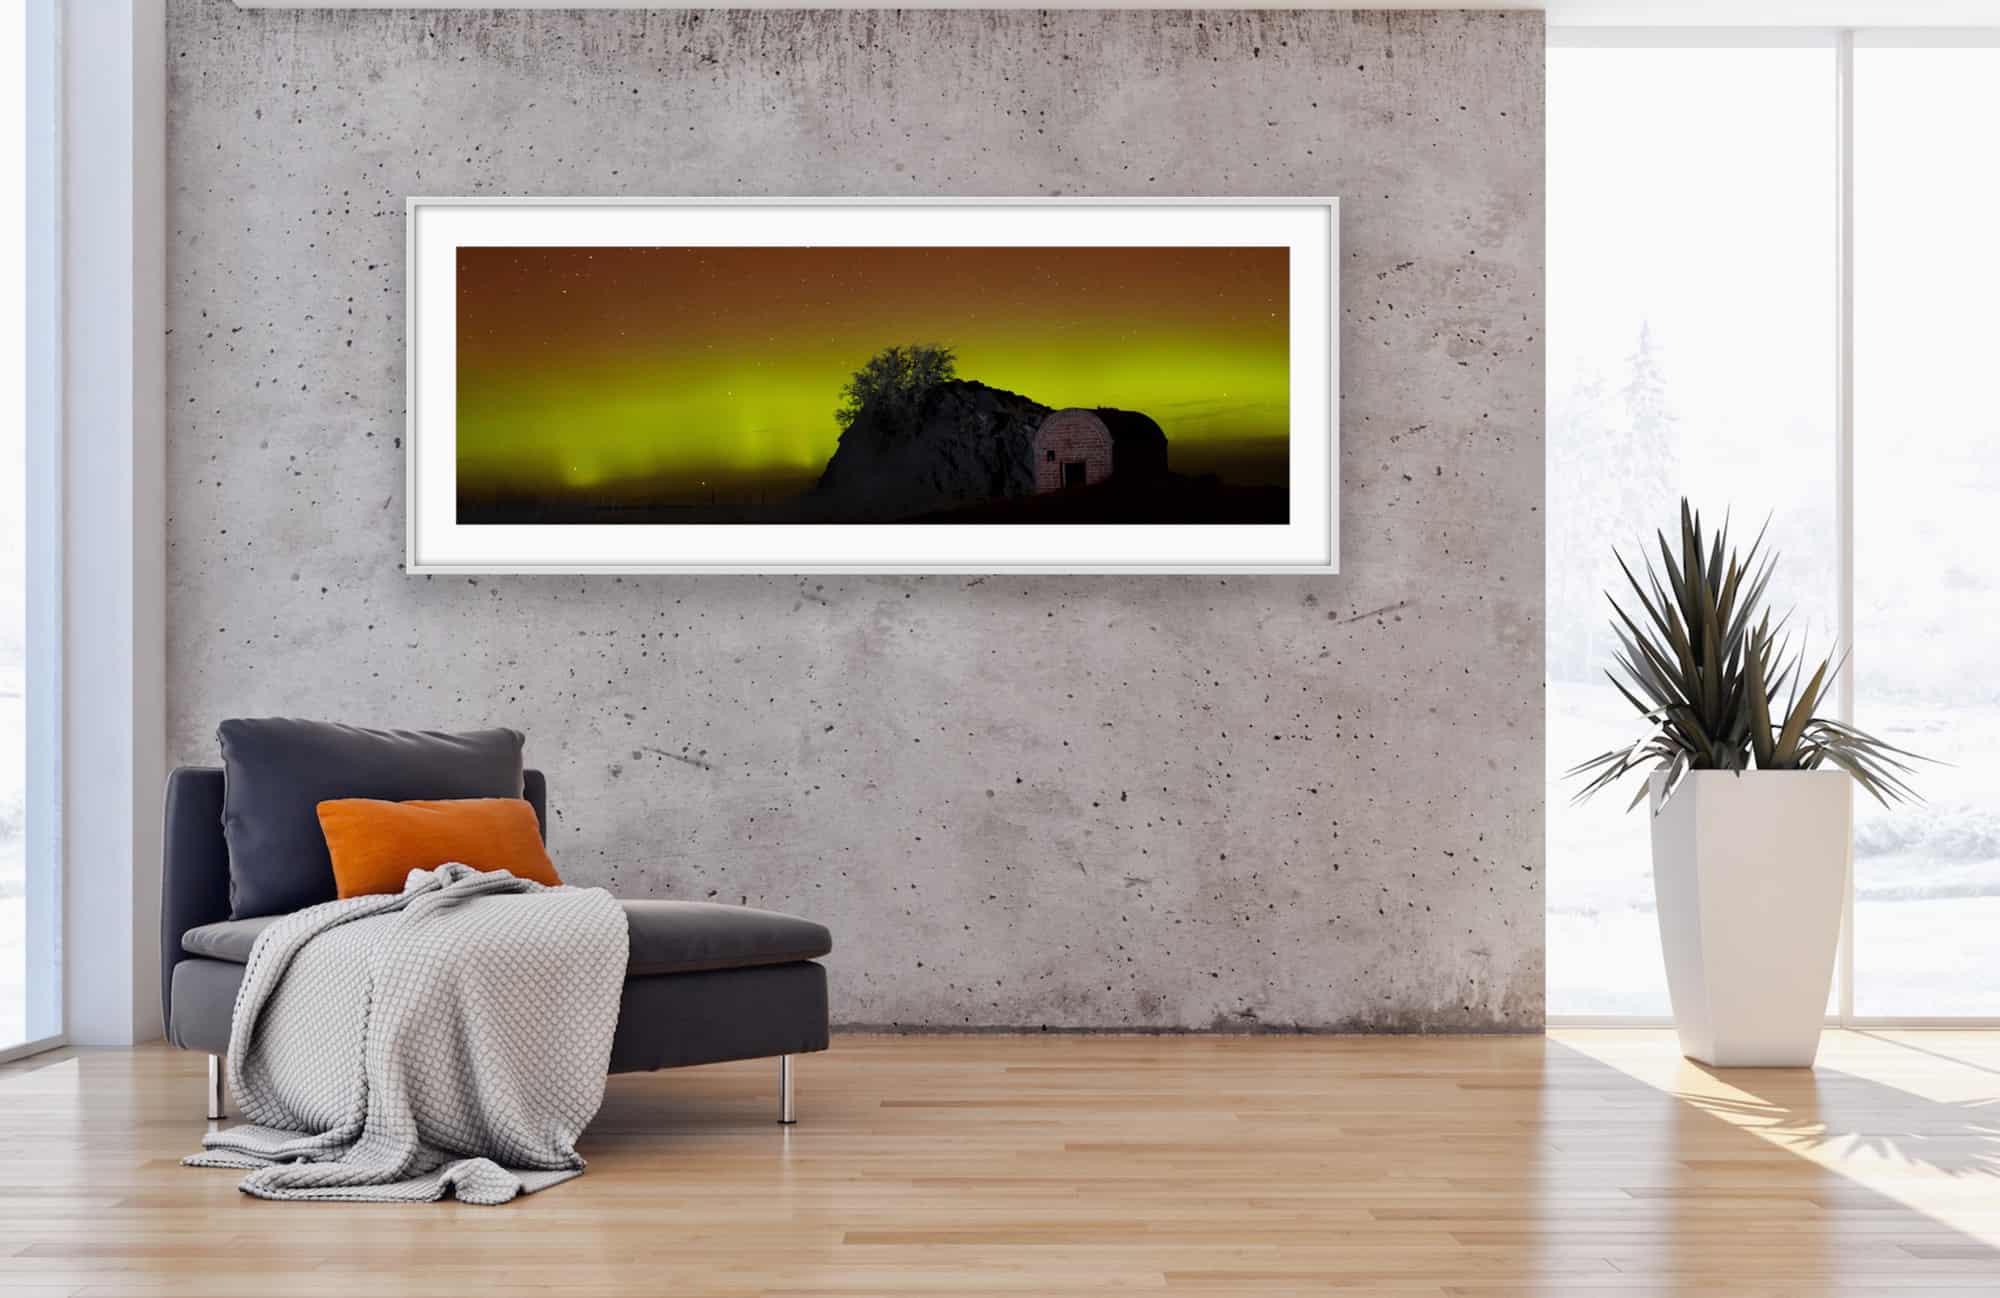 Framed print of the Aurora Australis displayed on a living room wall, taken by Christchurch photographer Tony Stewart.